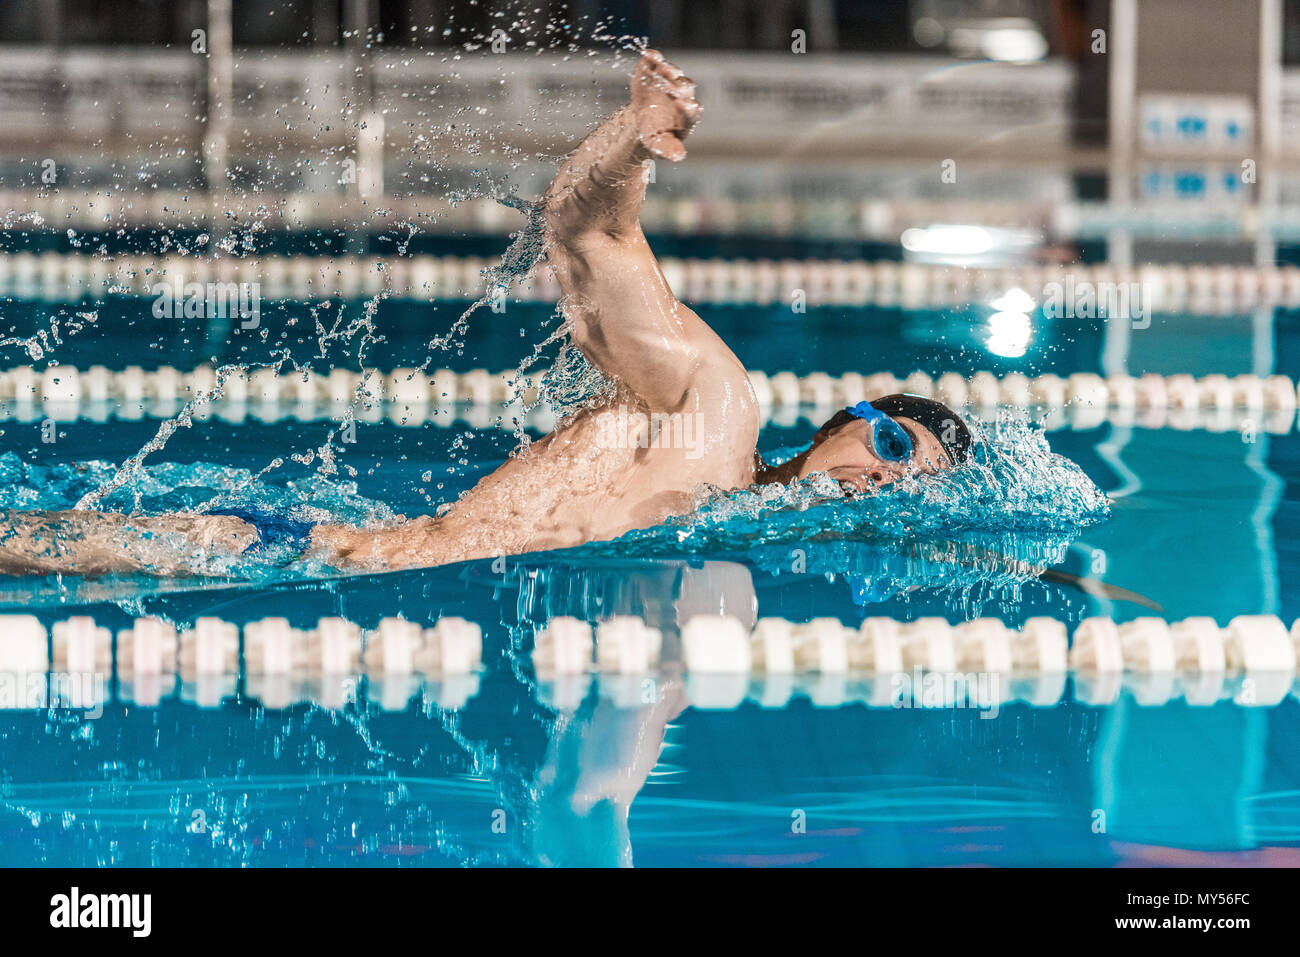 young male professional swimmer in competition swimming pool Stock ...